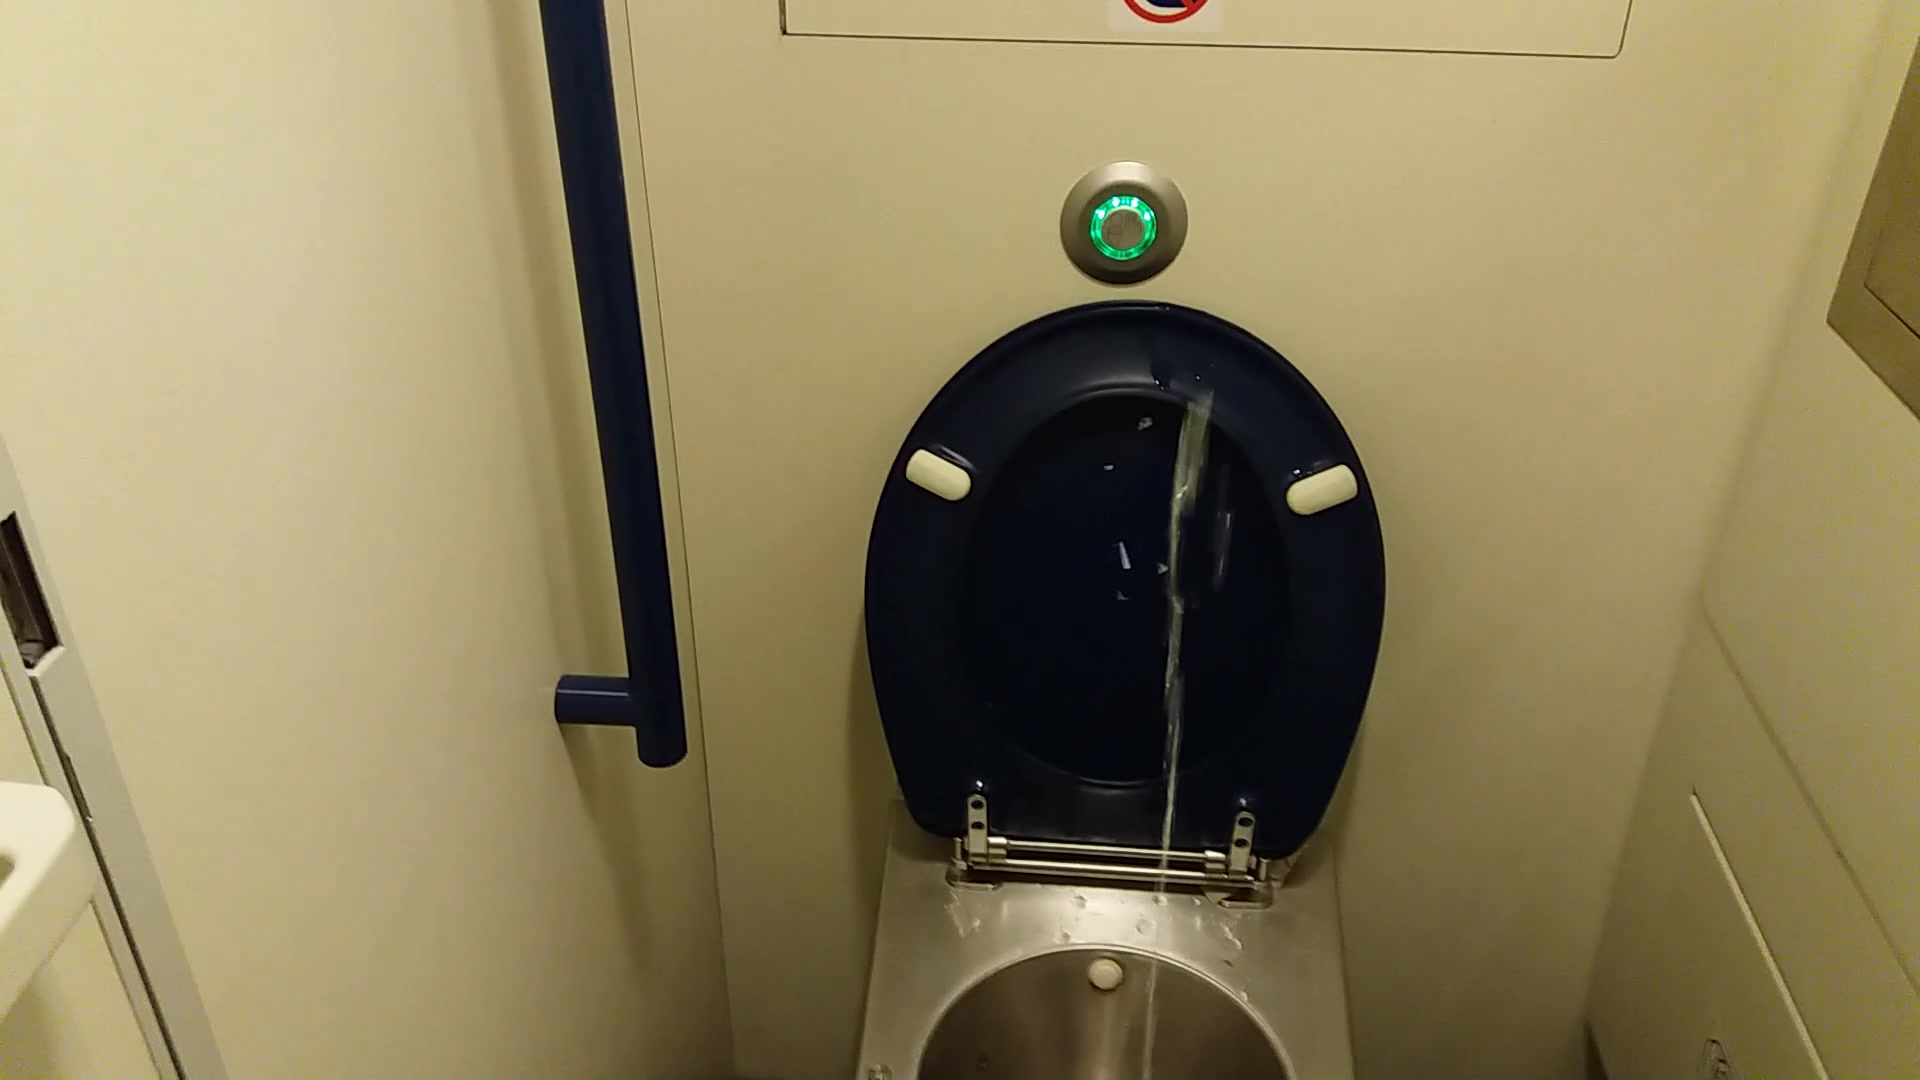 My load in the train toilet